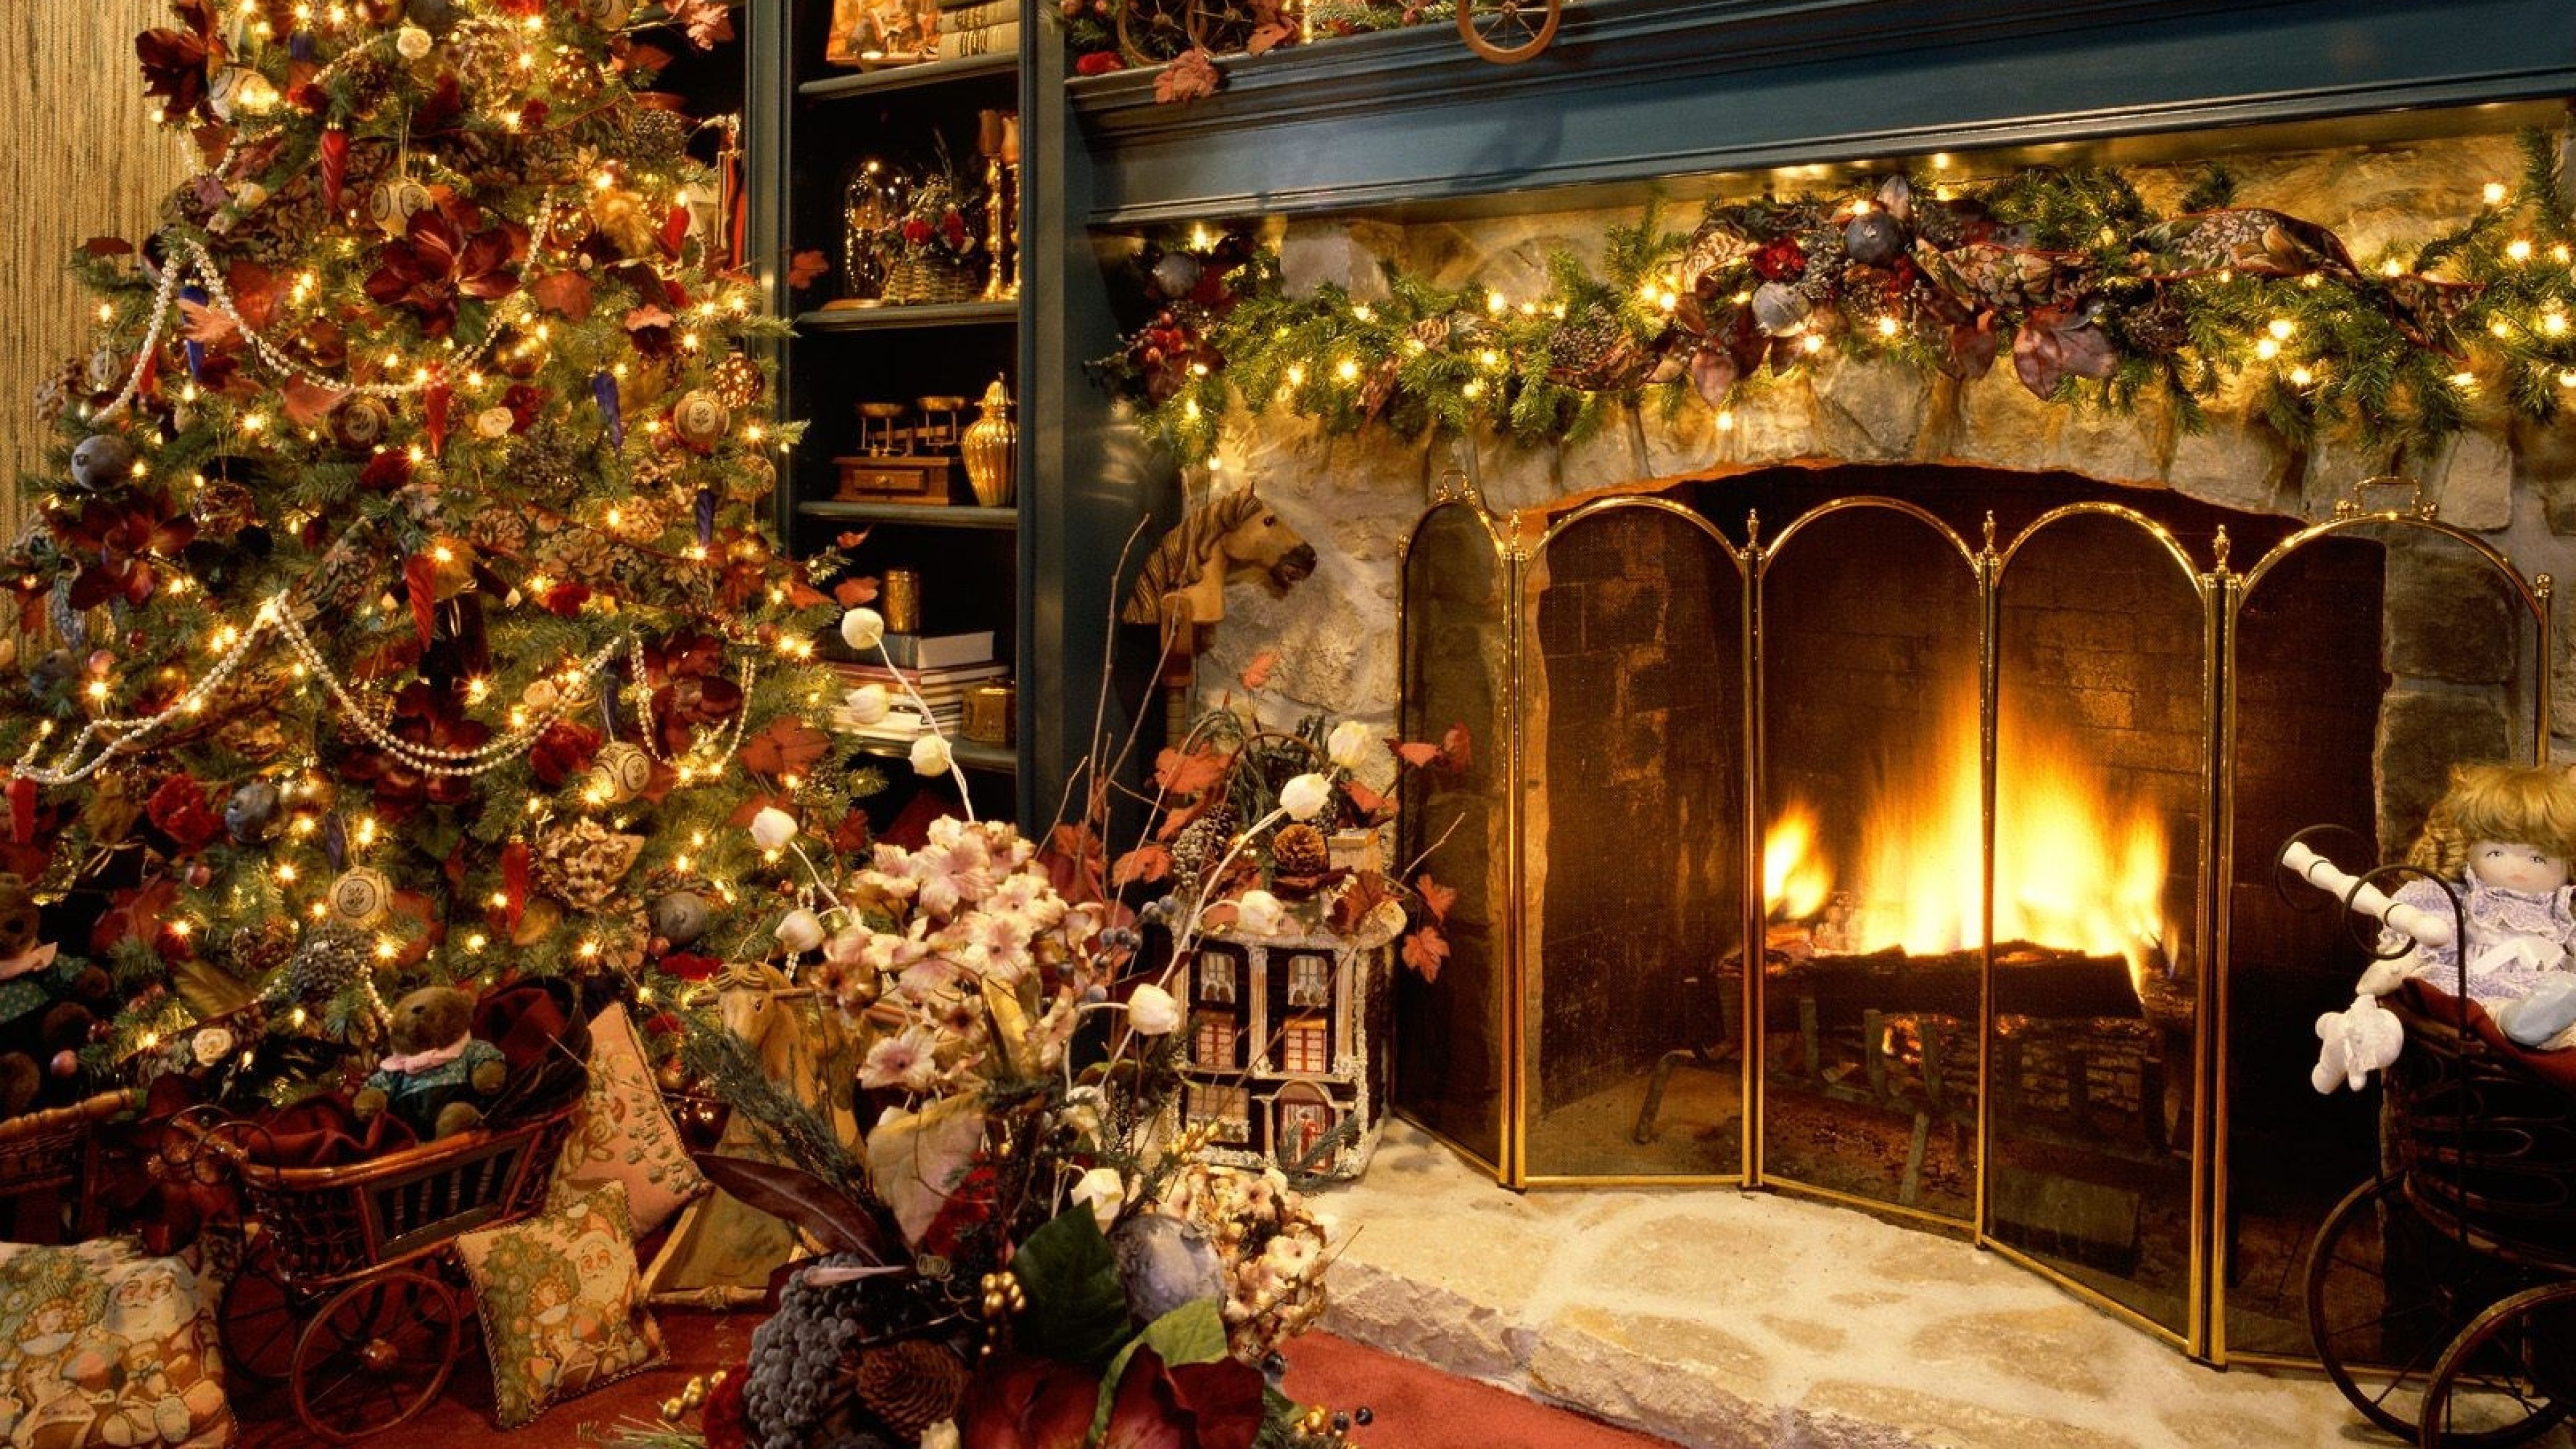 Fireplace Background Free Download. wallpaper.wiki